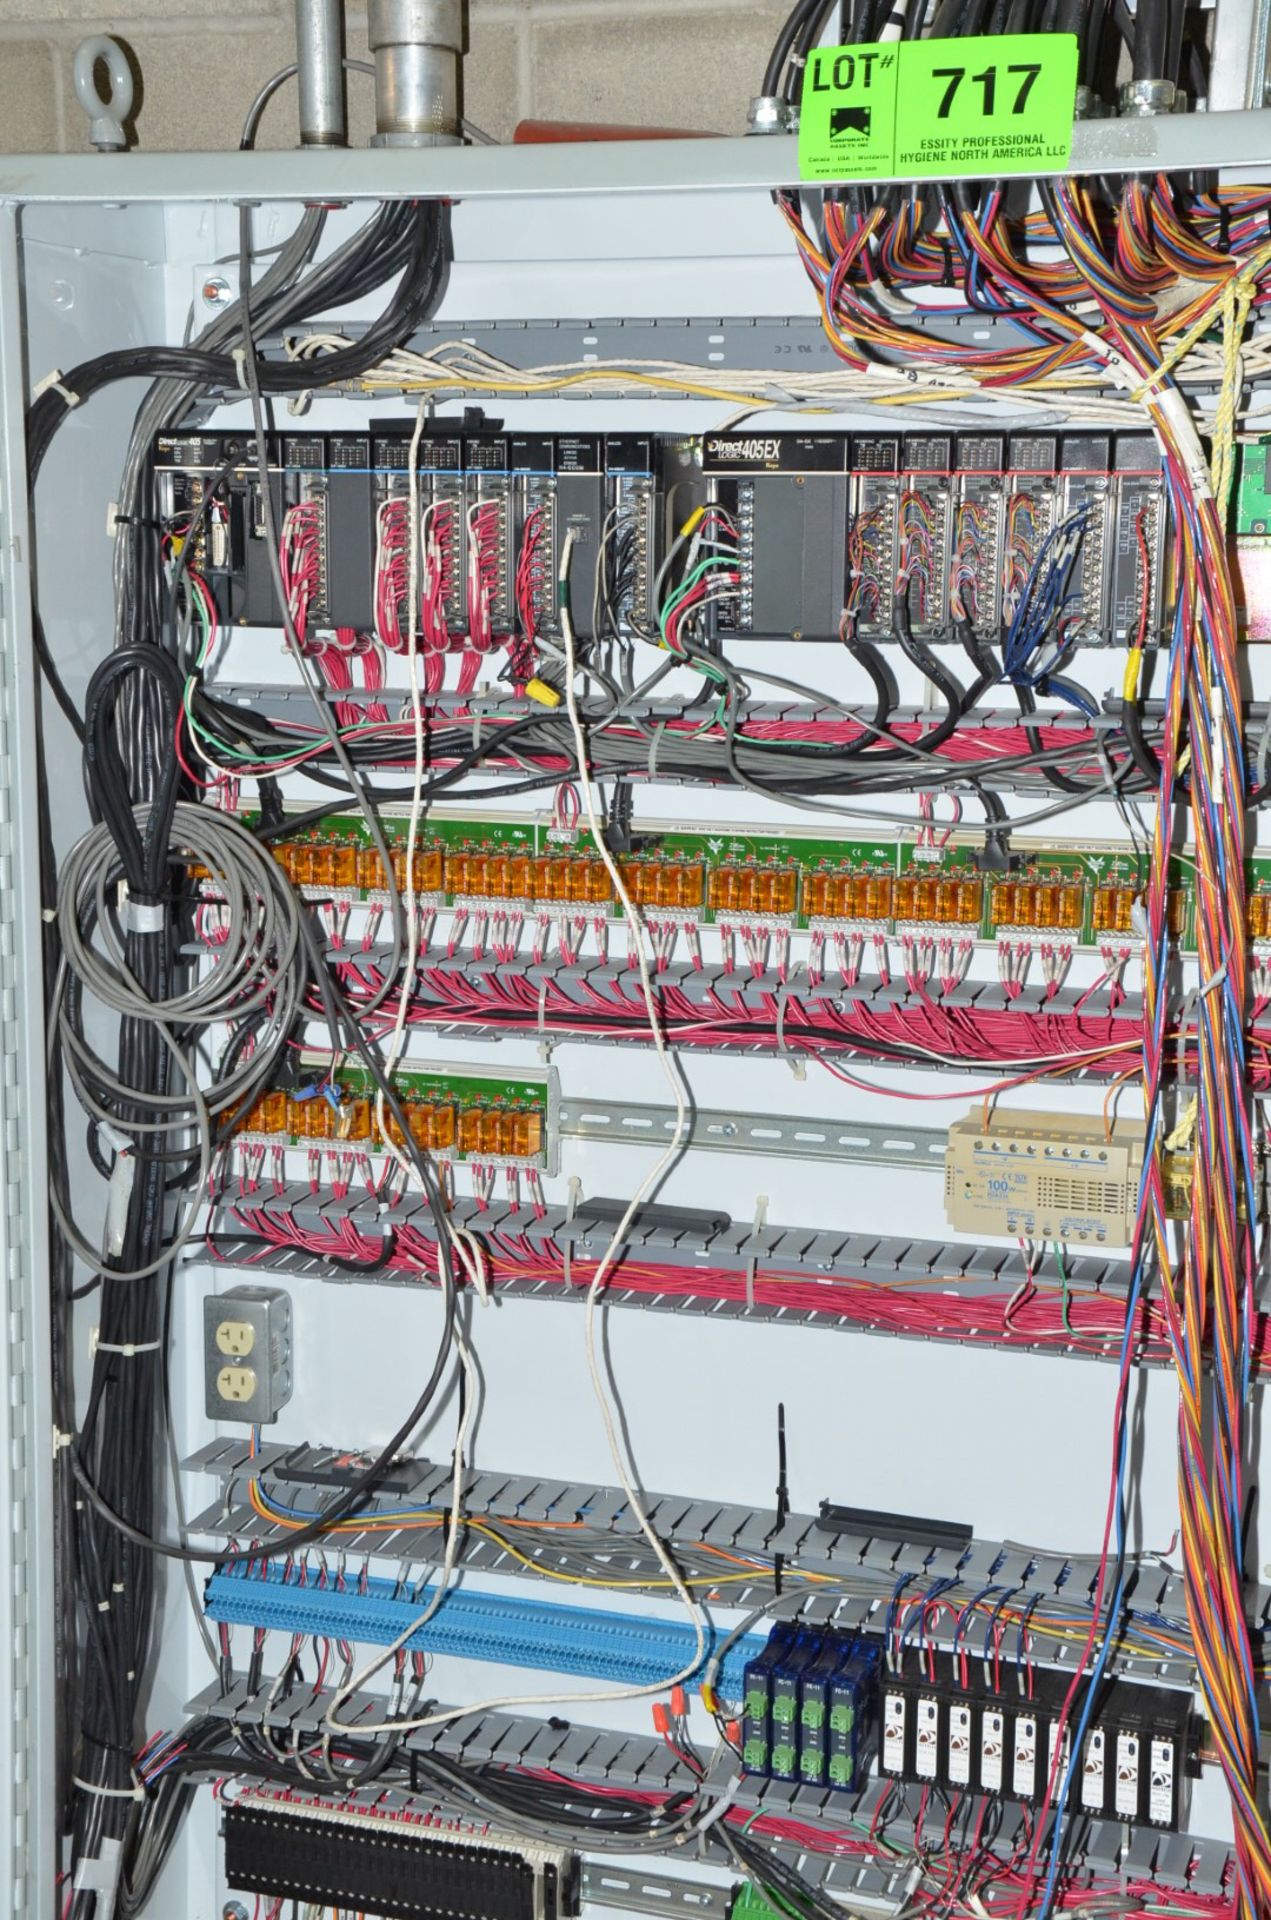 DIRECT LOGIC PLC CONTROL CABINET (CI) [RIGGING FEE FOR LOT #717 - $250 USD PLUS APPLICABLE TAXES]